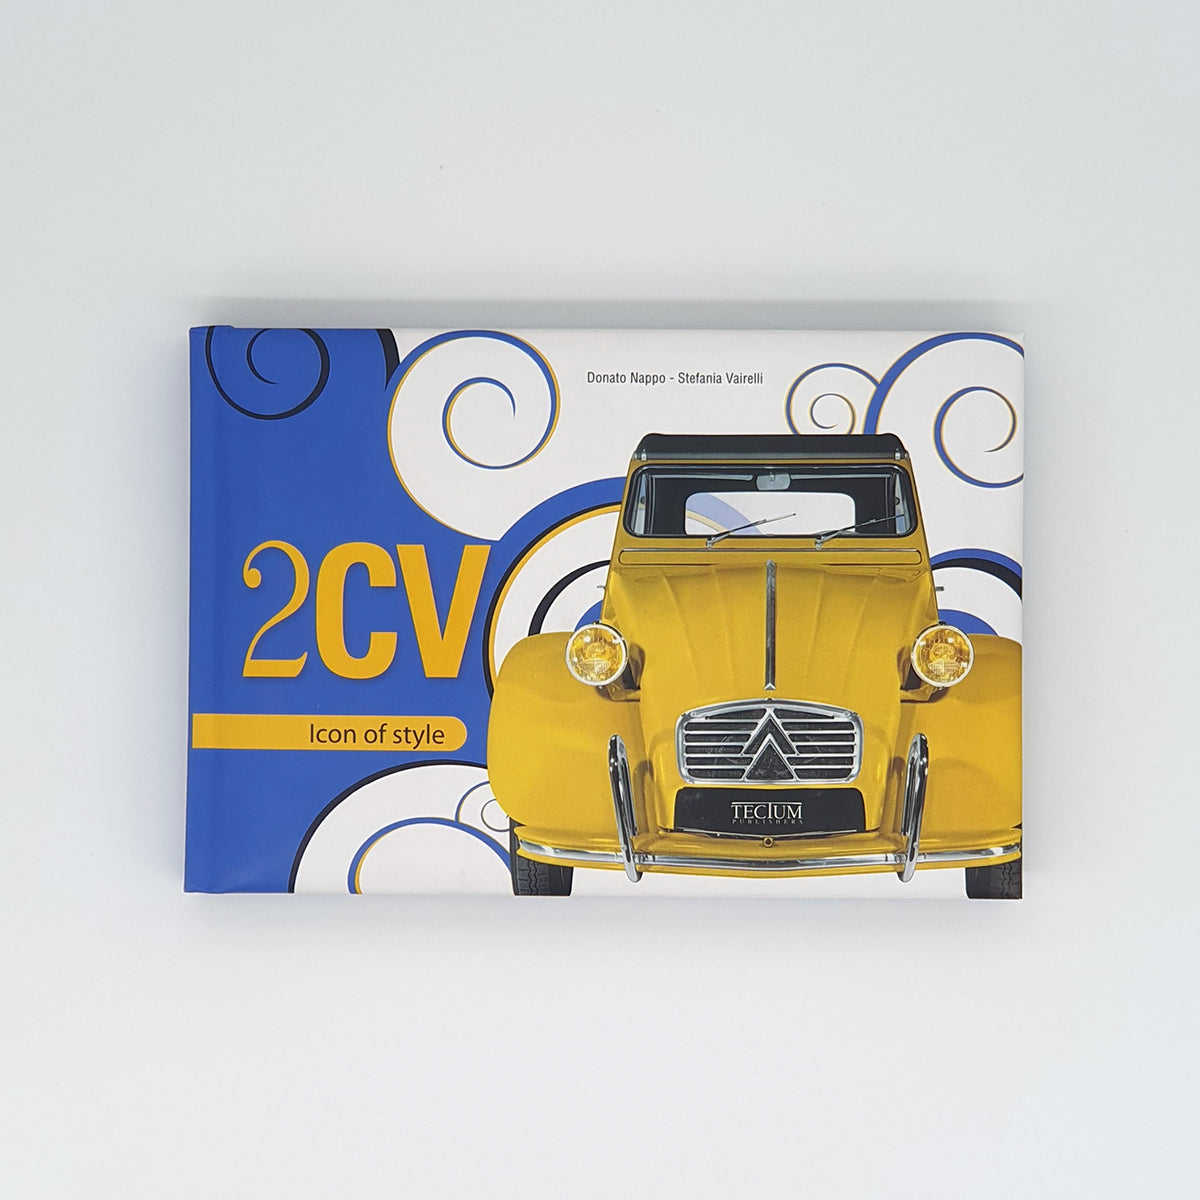 2CV, Icon of style